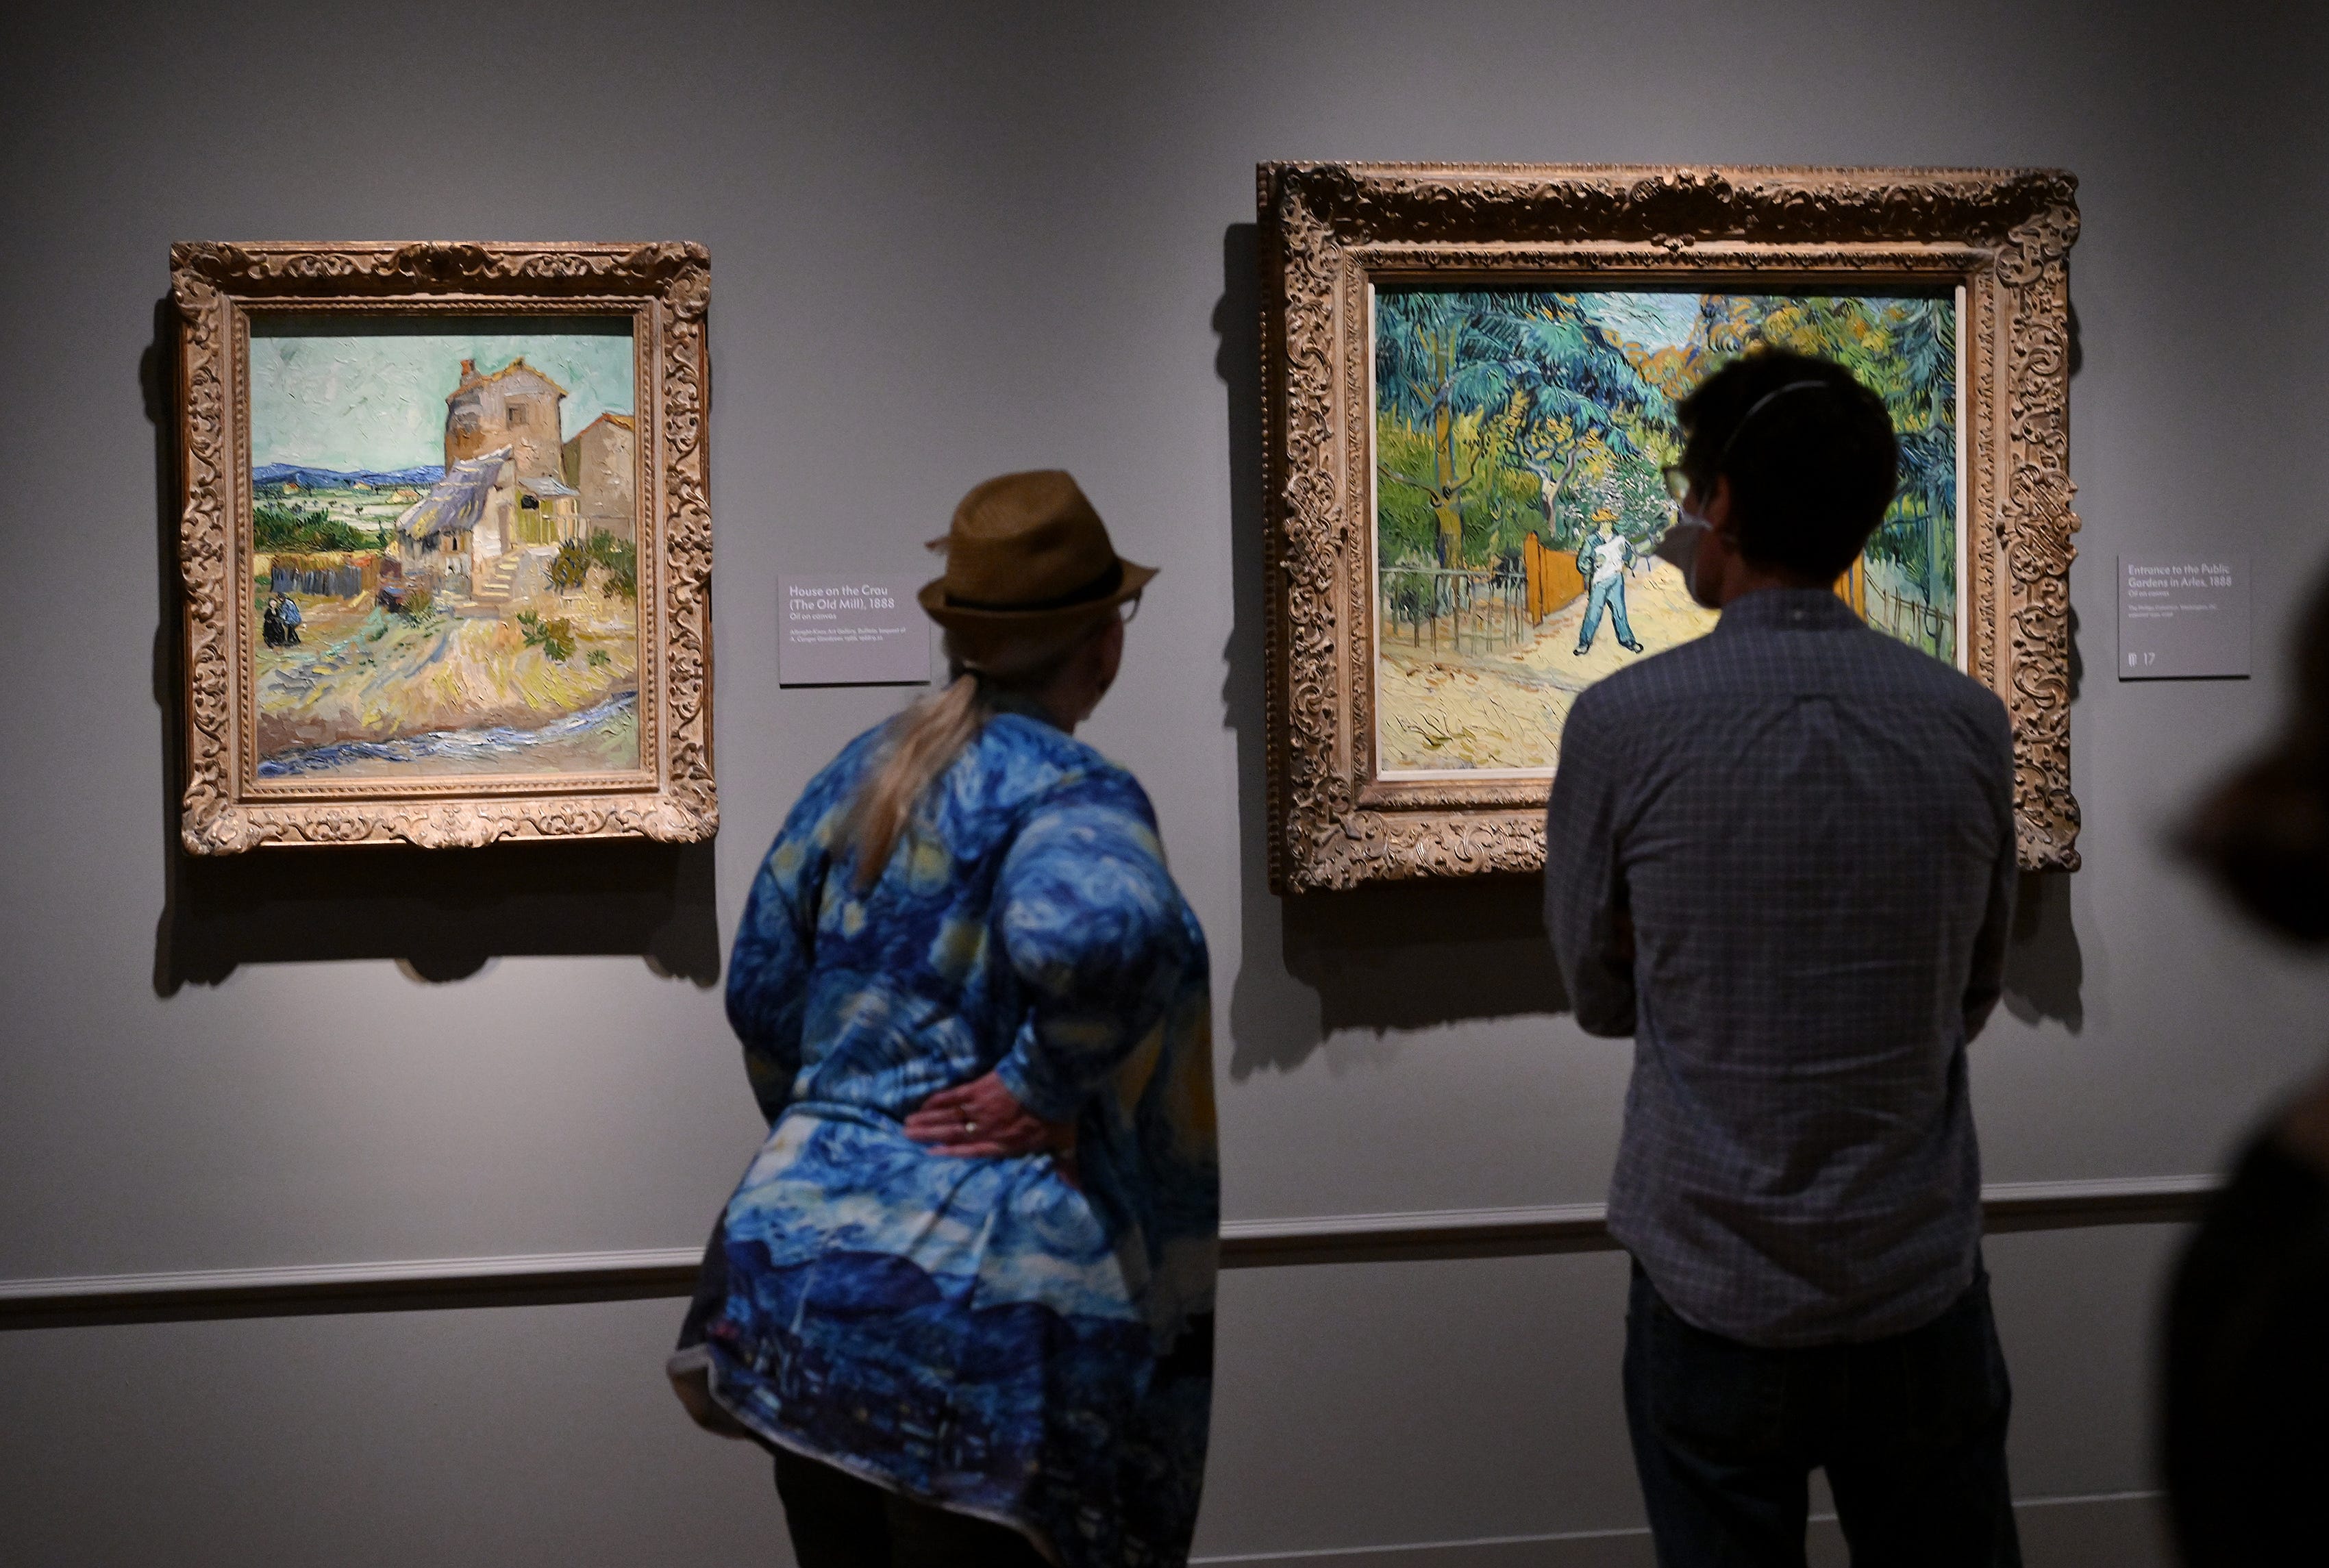 From left, Mary Kethman and Finn Rosbury both of Detroit look at paintings at the Van Gogh exhibit at the Detroit Institute of Arts in Detroit on Oct. 2, 2022.